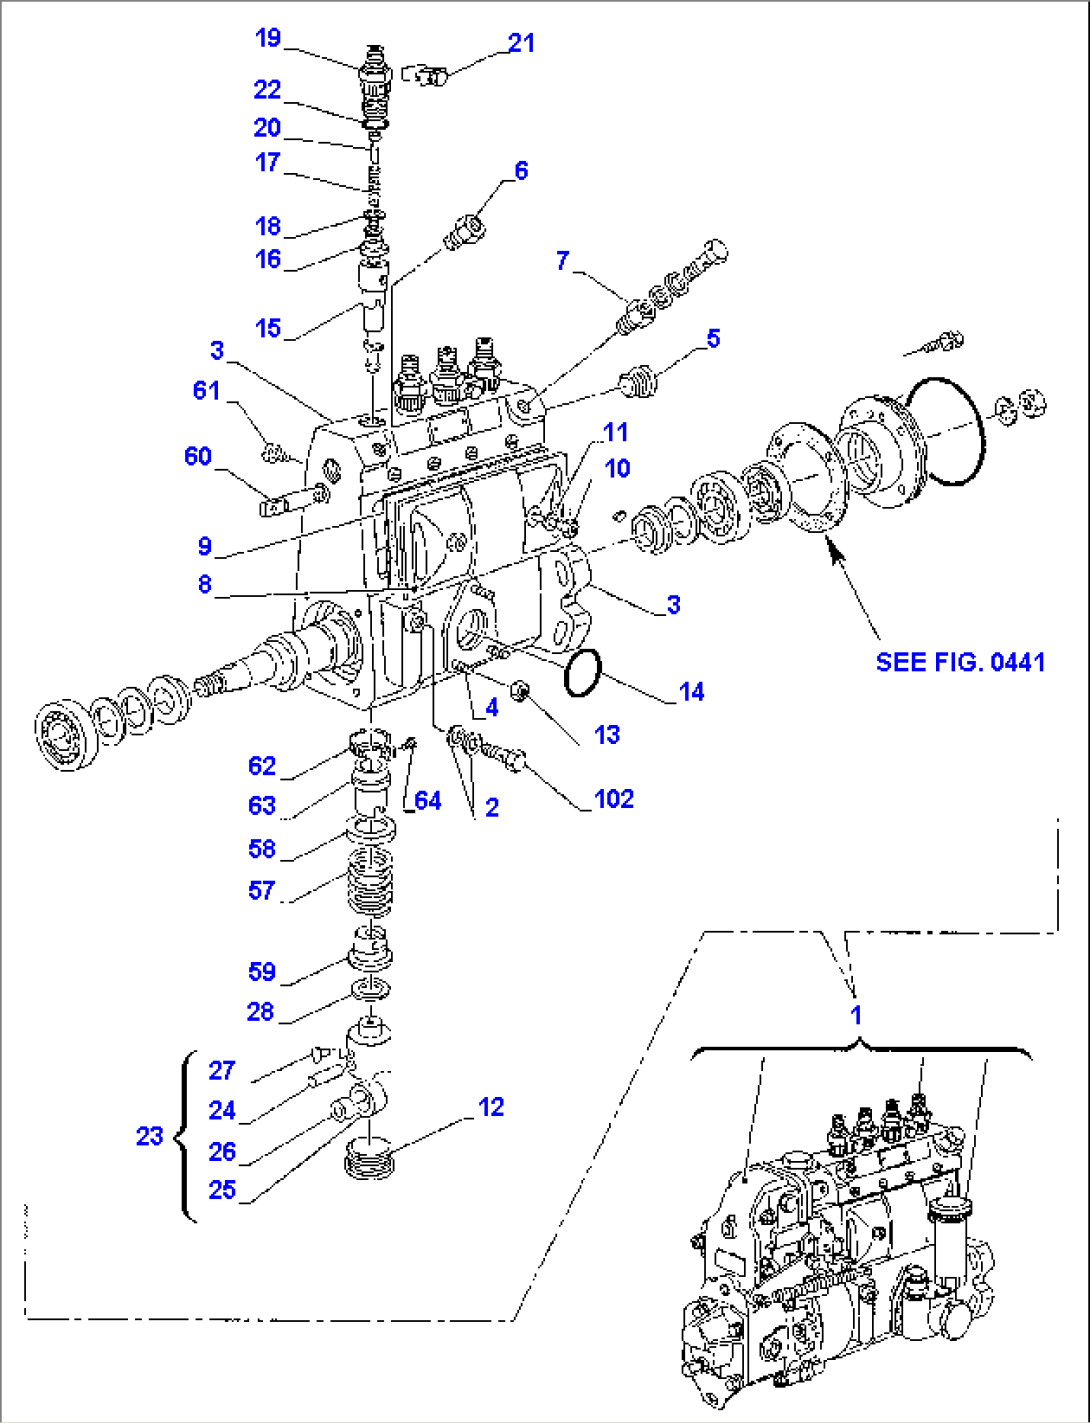 FUEL INJECTION PUMP (1/2)